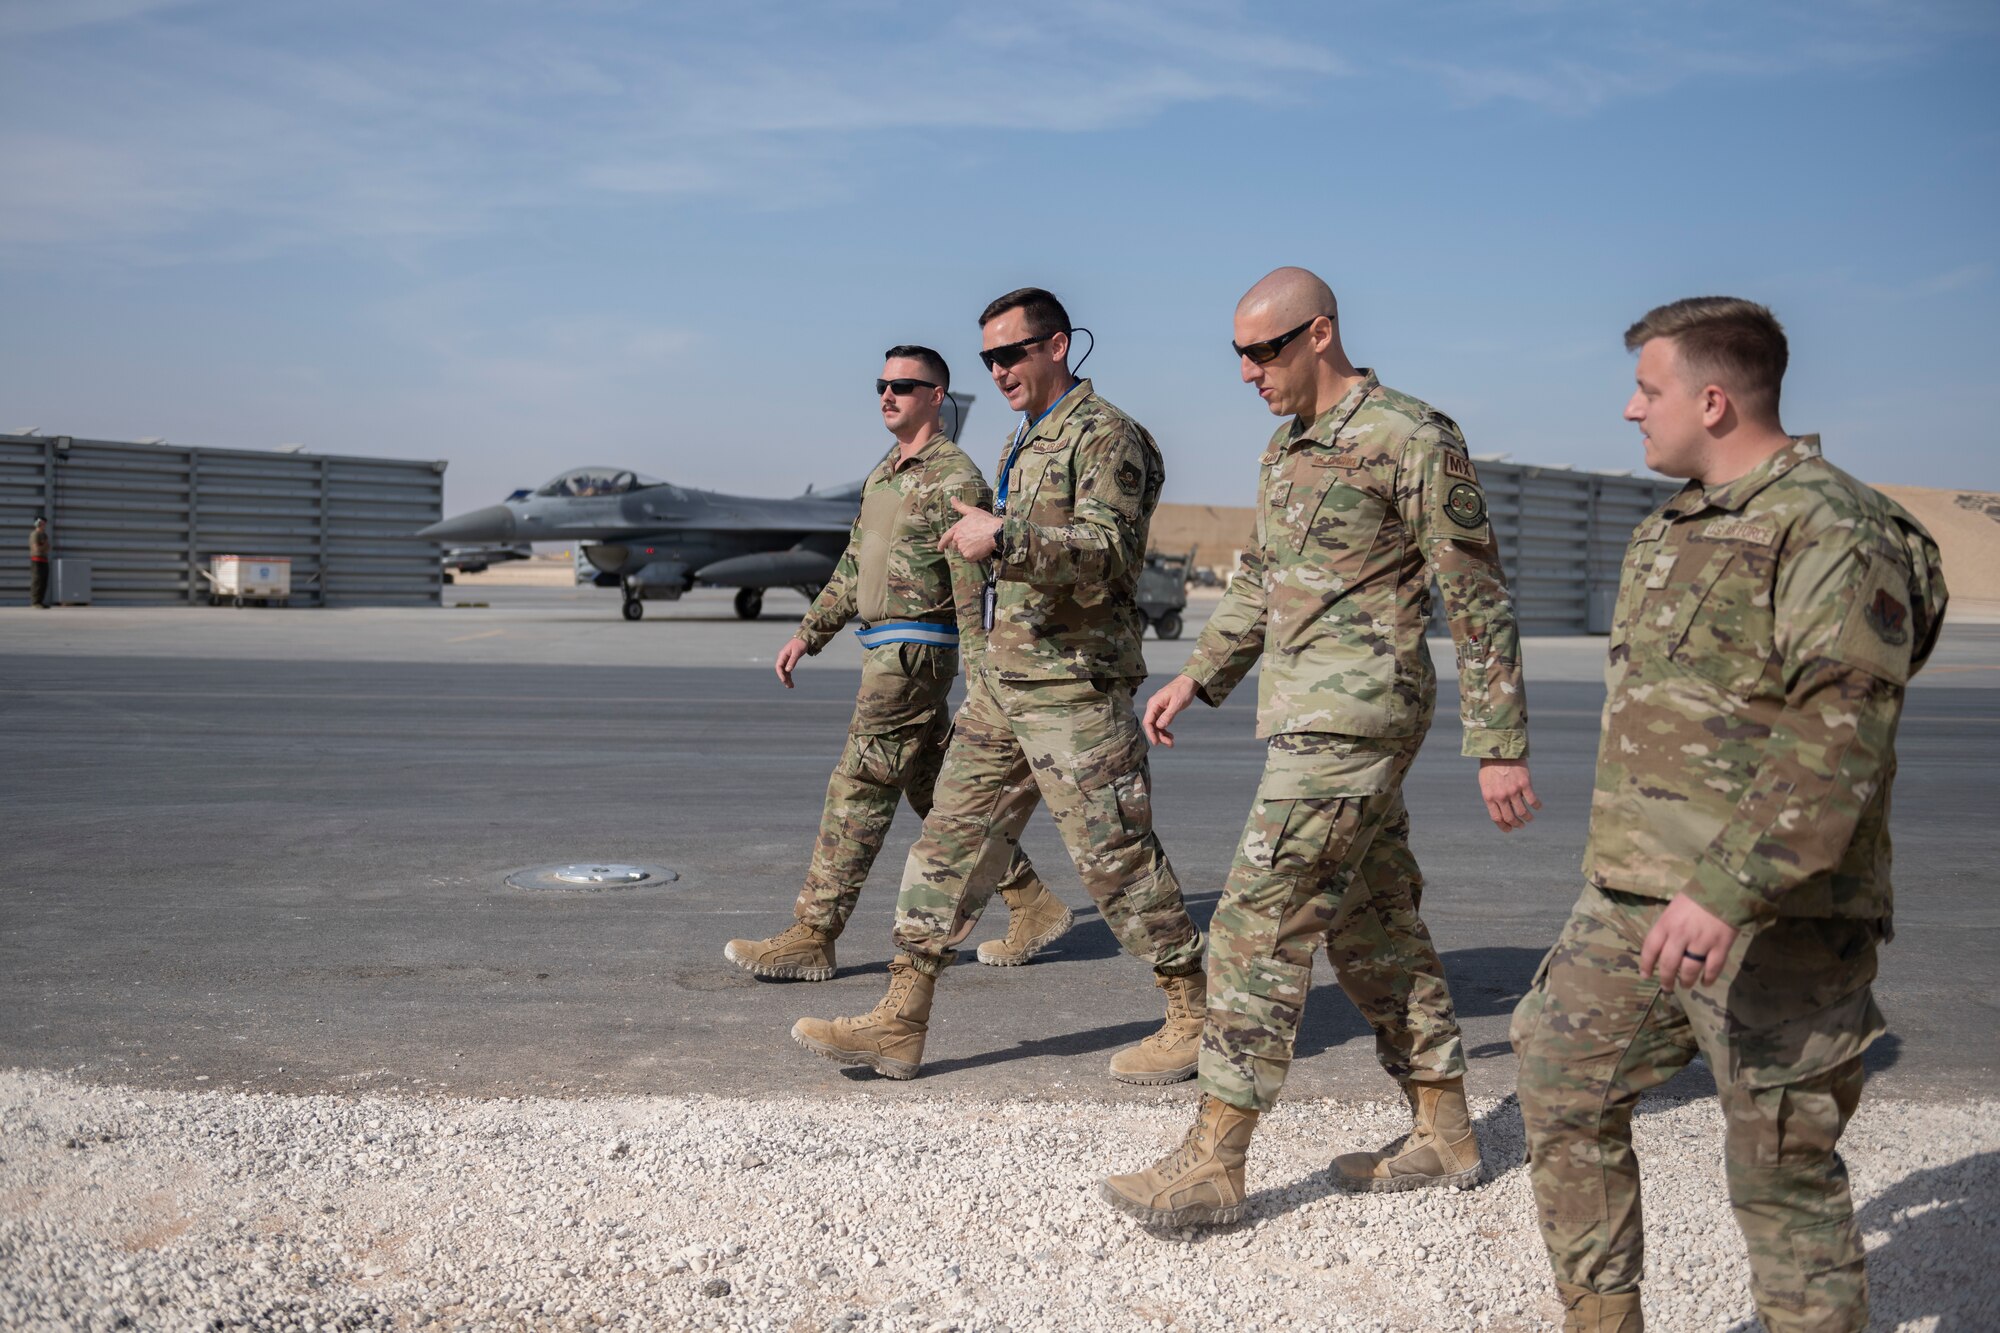 U.S. Airmen with the 55th Expeditionary Fighter Generation Squadron speak with Chief Master Sgt. Sean Milligan, middle right, 332nd Air Expeditionary Wing command chief, Nov. 13, 2021, at an undisclosed location somewhere in Southwest Asia. The 55th EFGS store and inspect equipment for five maintenance sections responsible for maintaining F-16C Fighting Falcons. (U.S. Air Force photo by Senior Airman Cameron Otte)